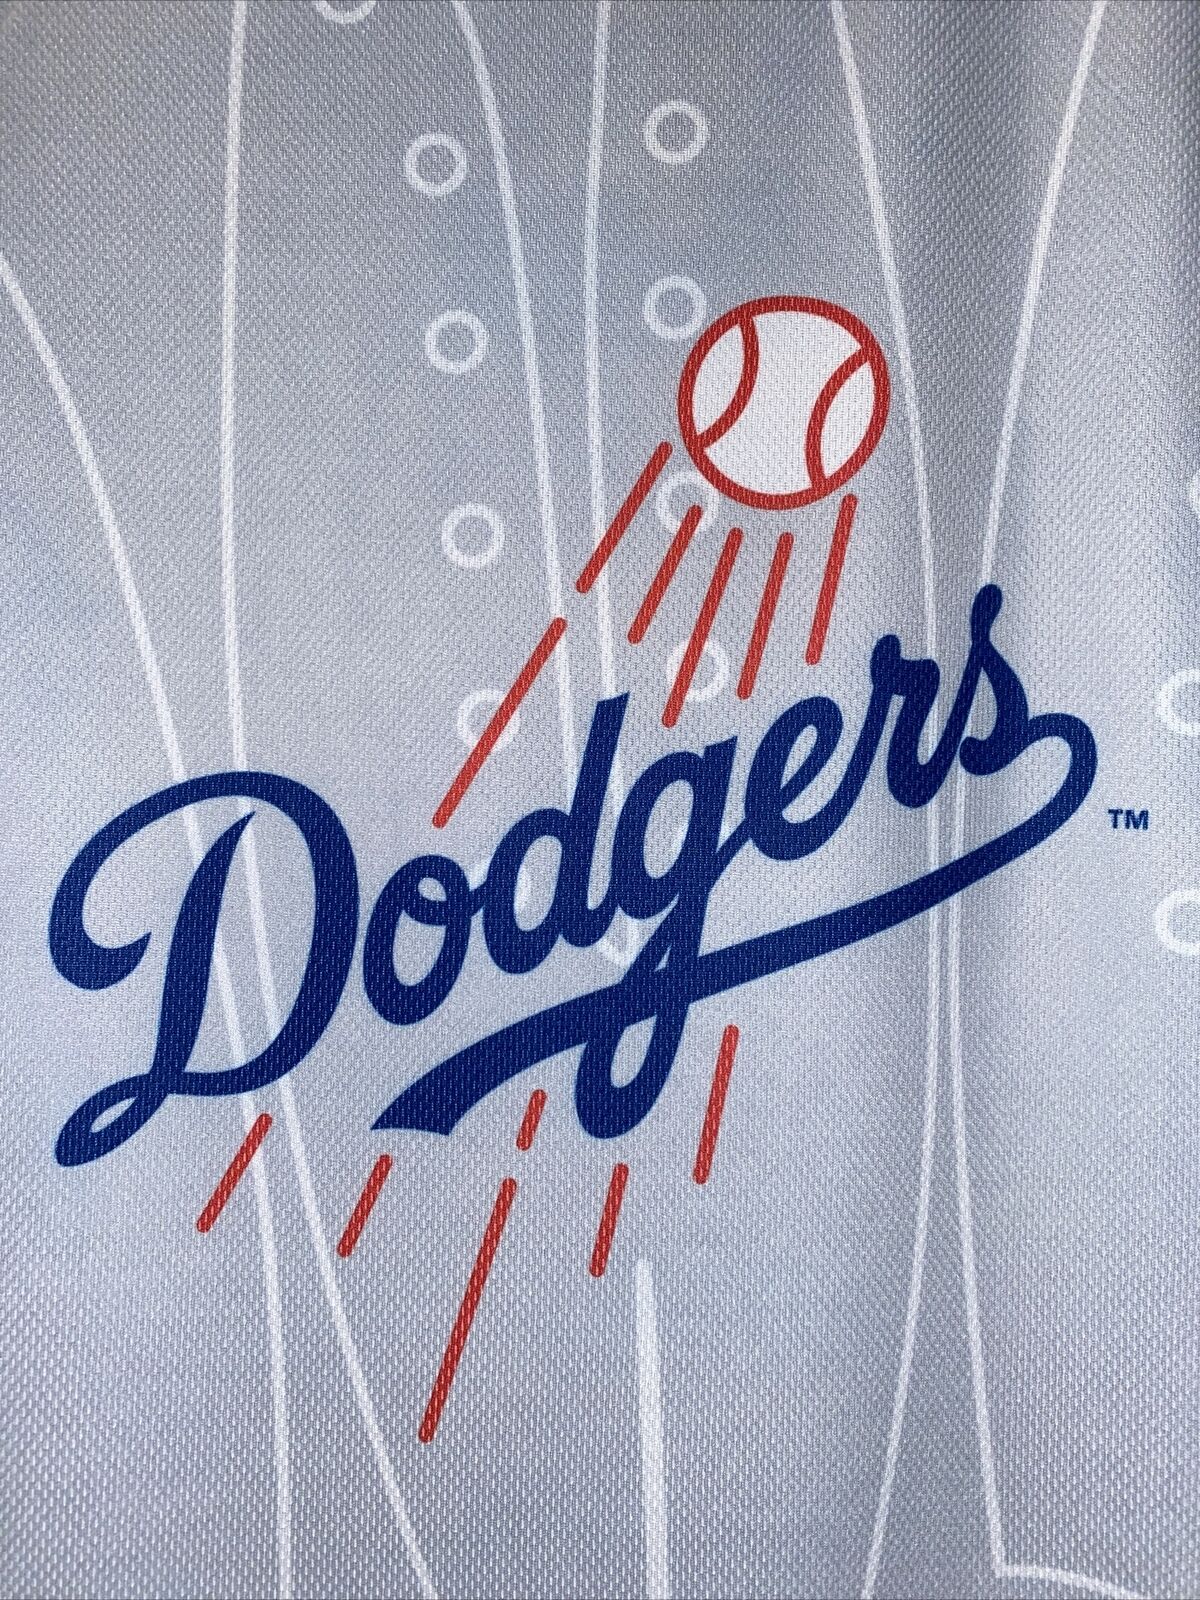 Sportscrate Limited Edition by Loot Crate MLB Dodgers Men's Athletic Shirt (M)